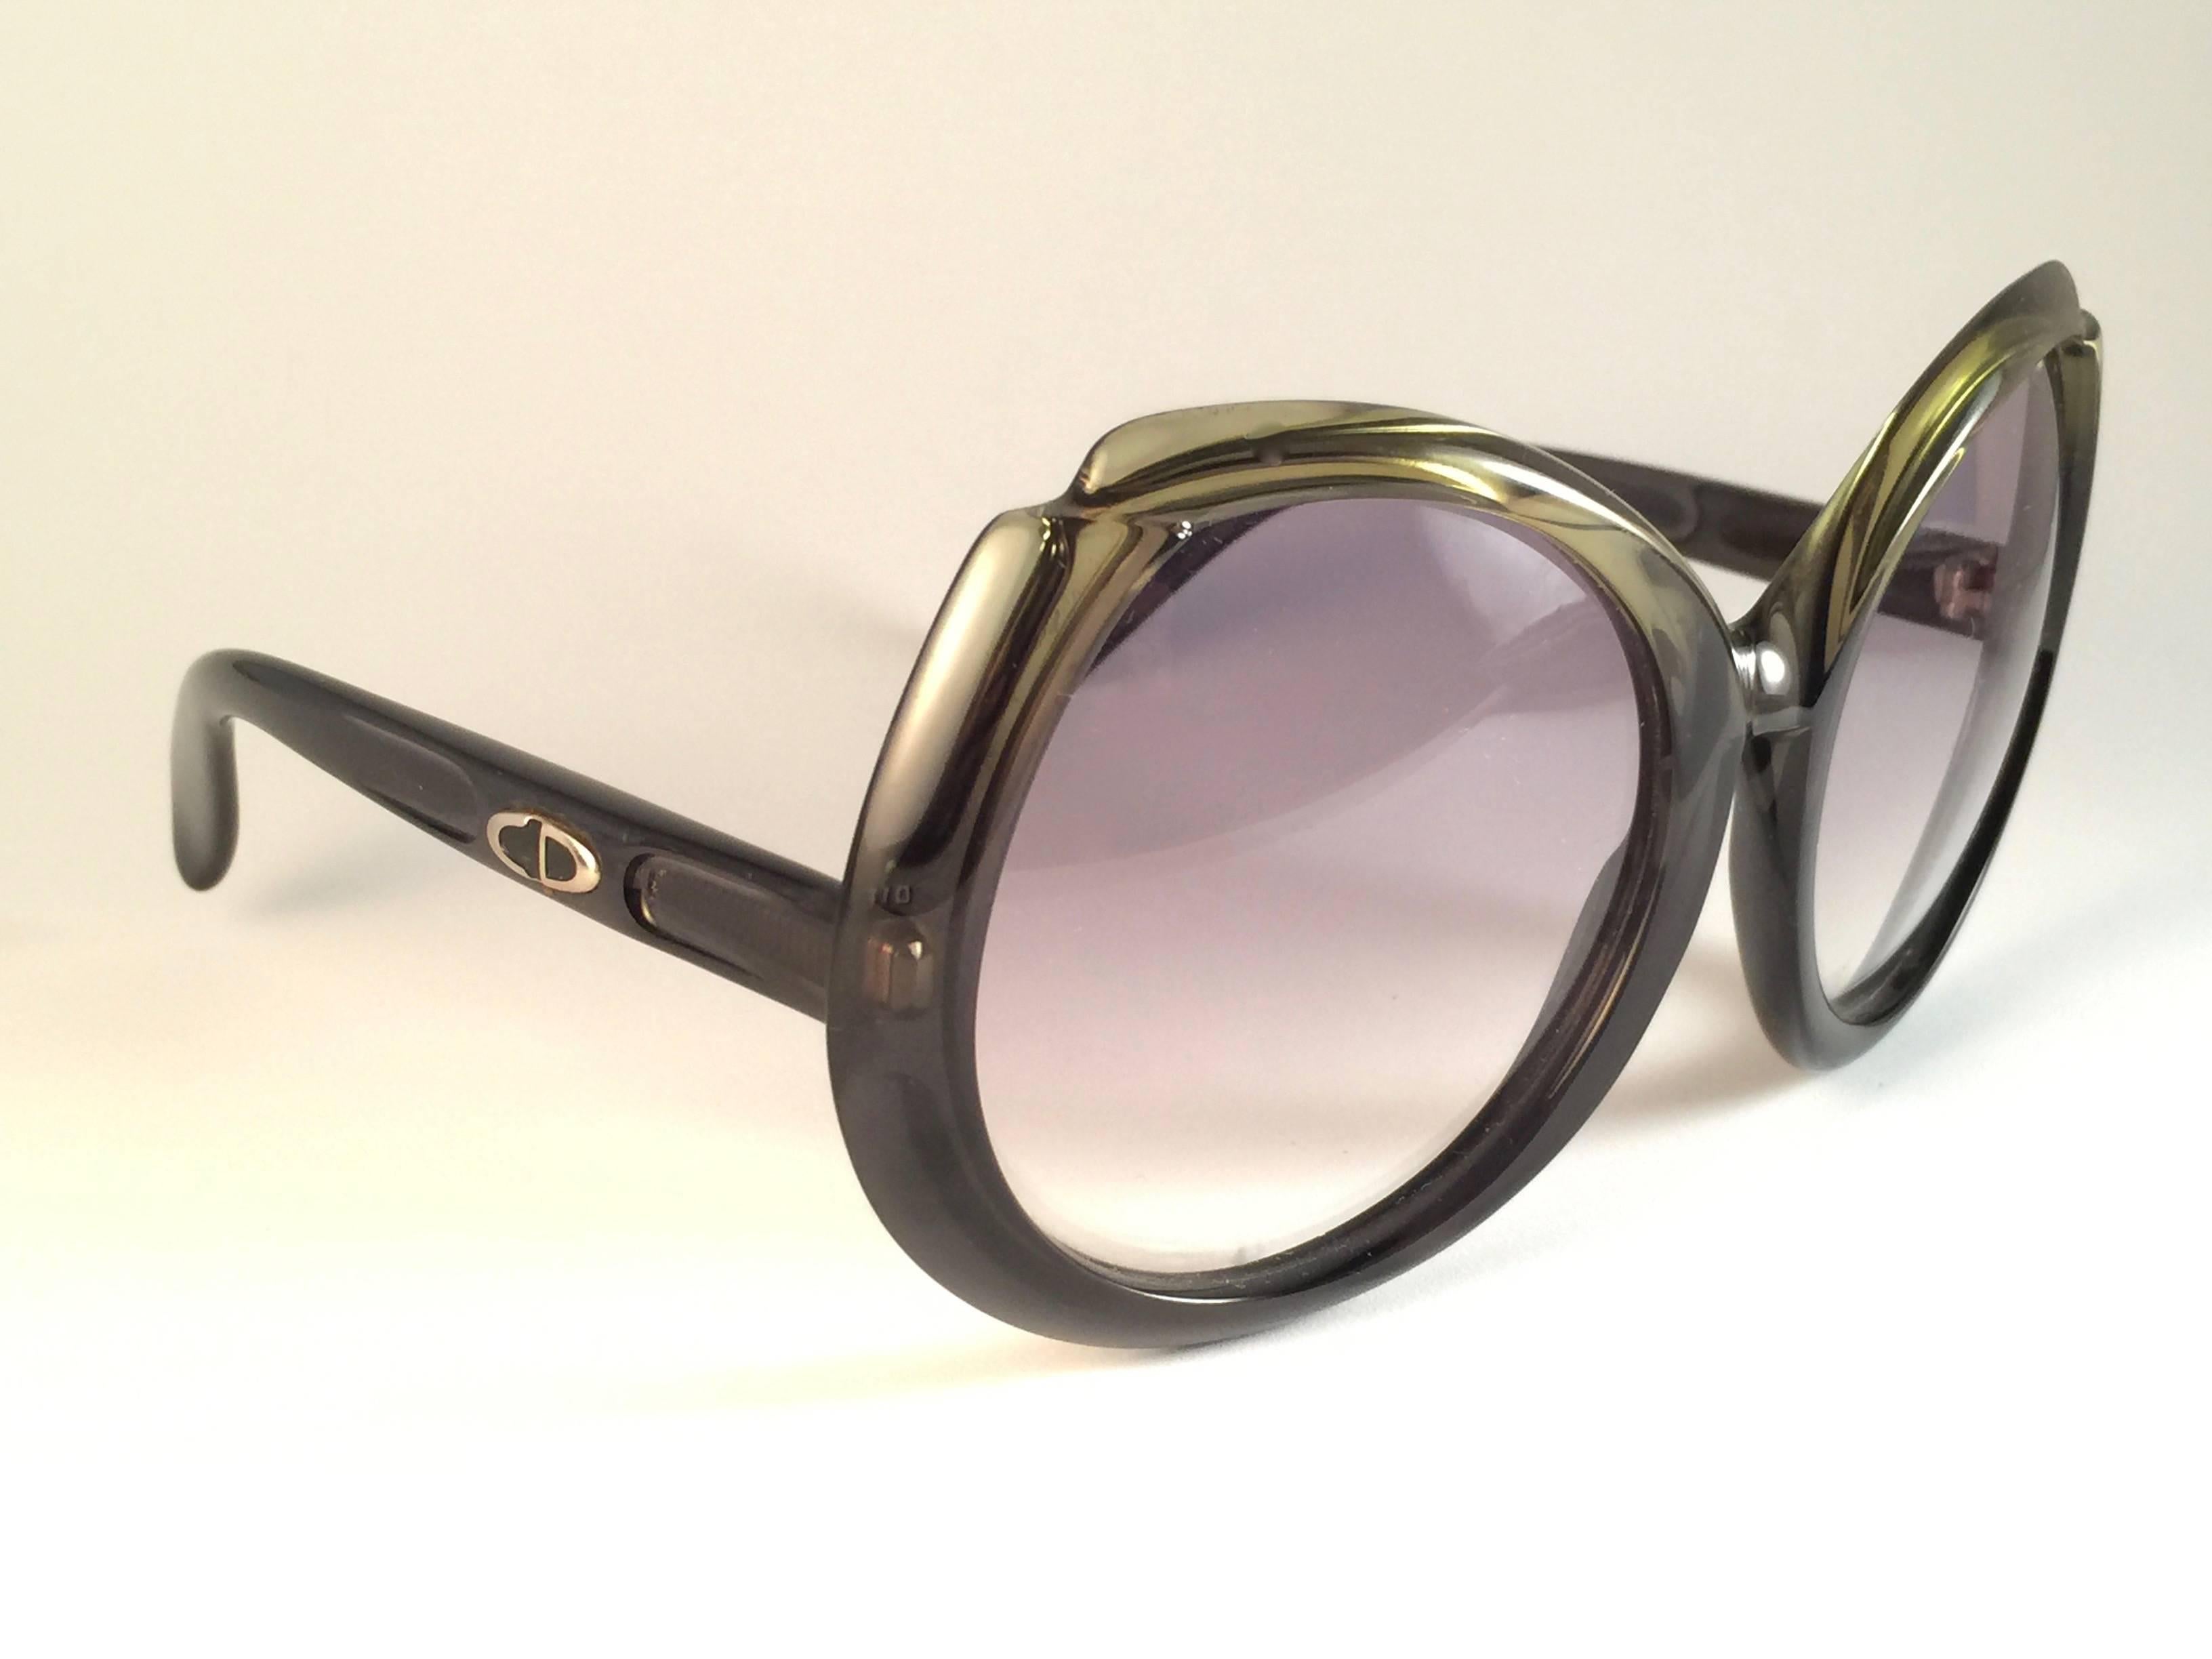 New vintage Christian Dior sunglasses.

Light purple gradient lenses.

Comes with it original CD sleeve.

New, never worn or displayed this item may show light sign of wear due to storage.

Made in Austria